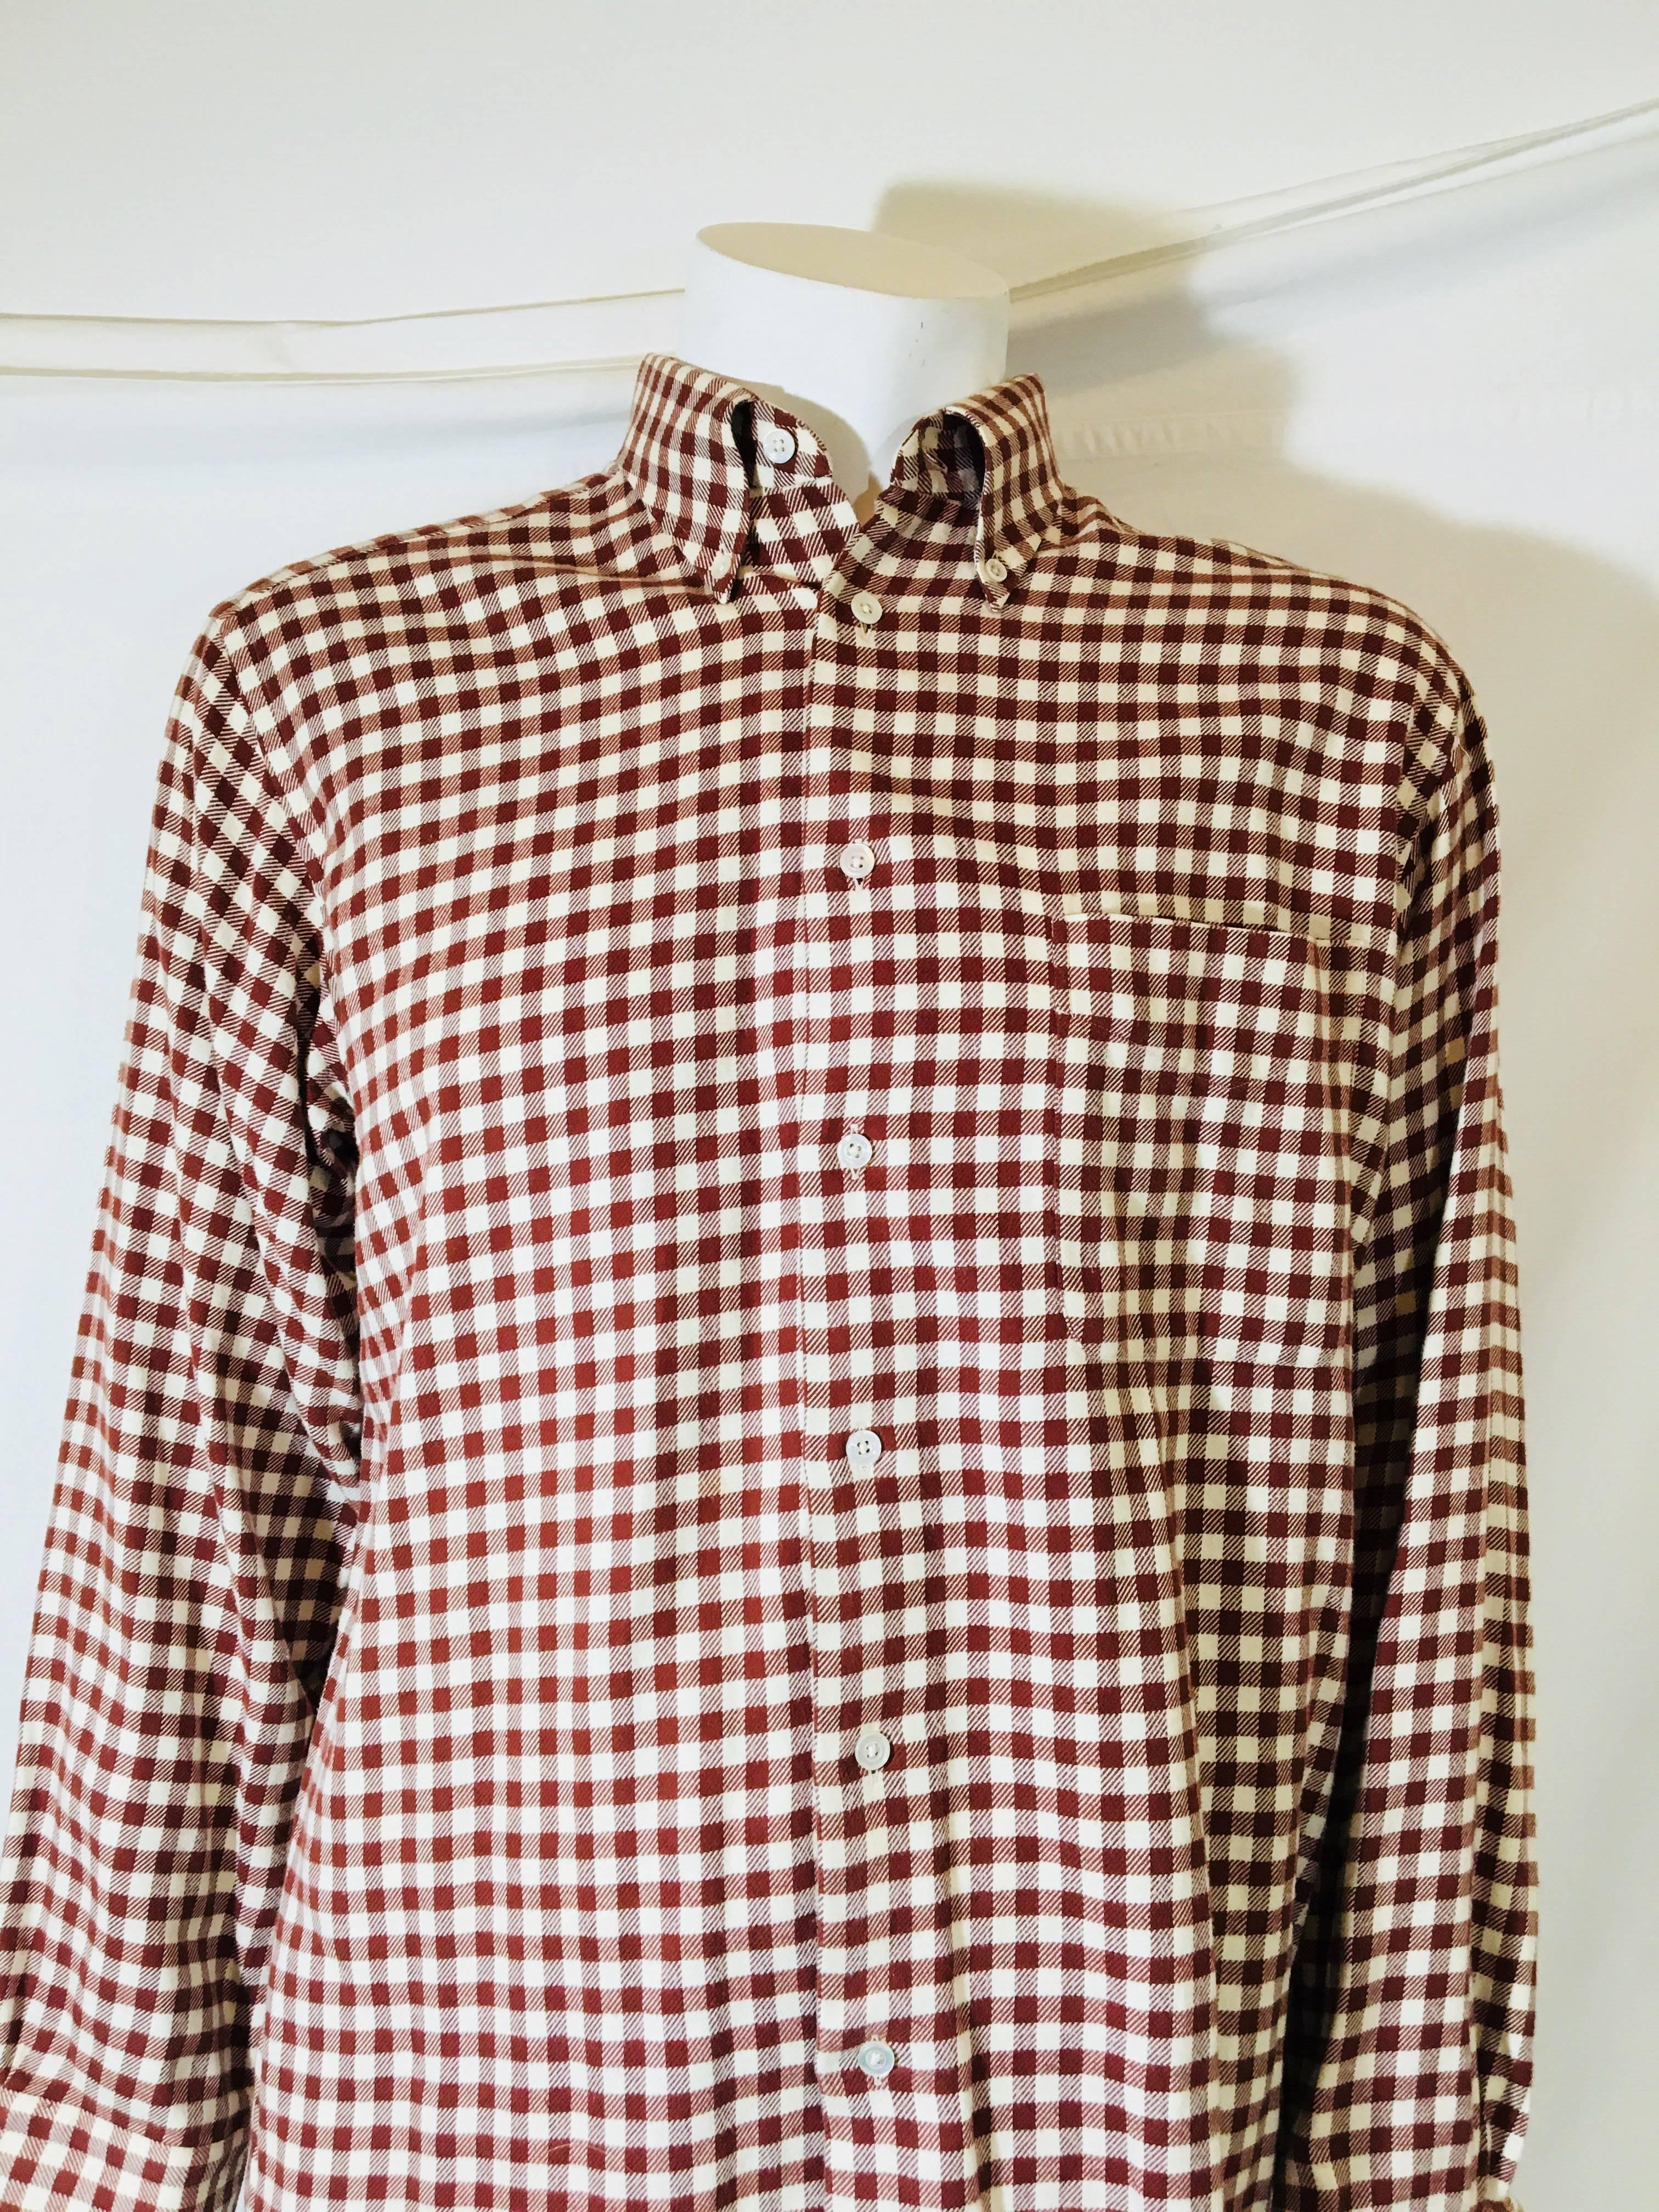 Mens Hermes Maroon and White Gingham Cotton Button Up With Single Breast Pocket.